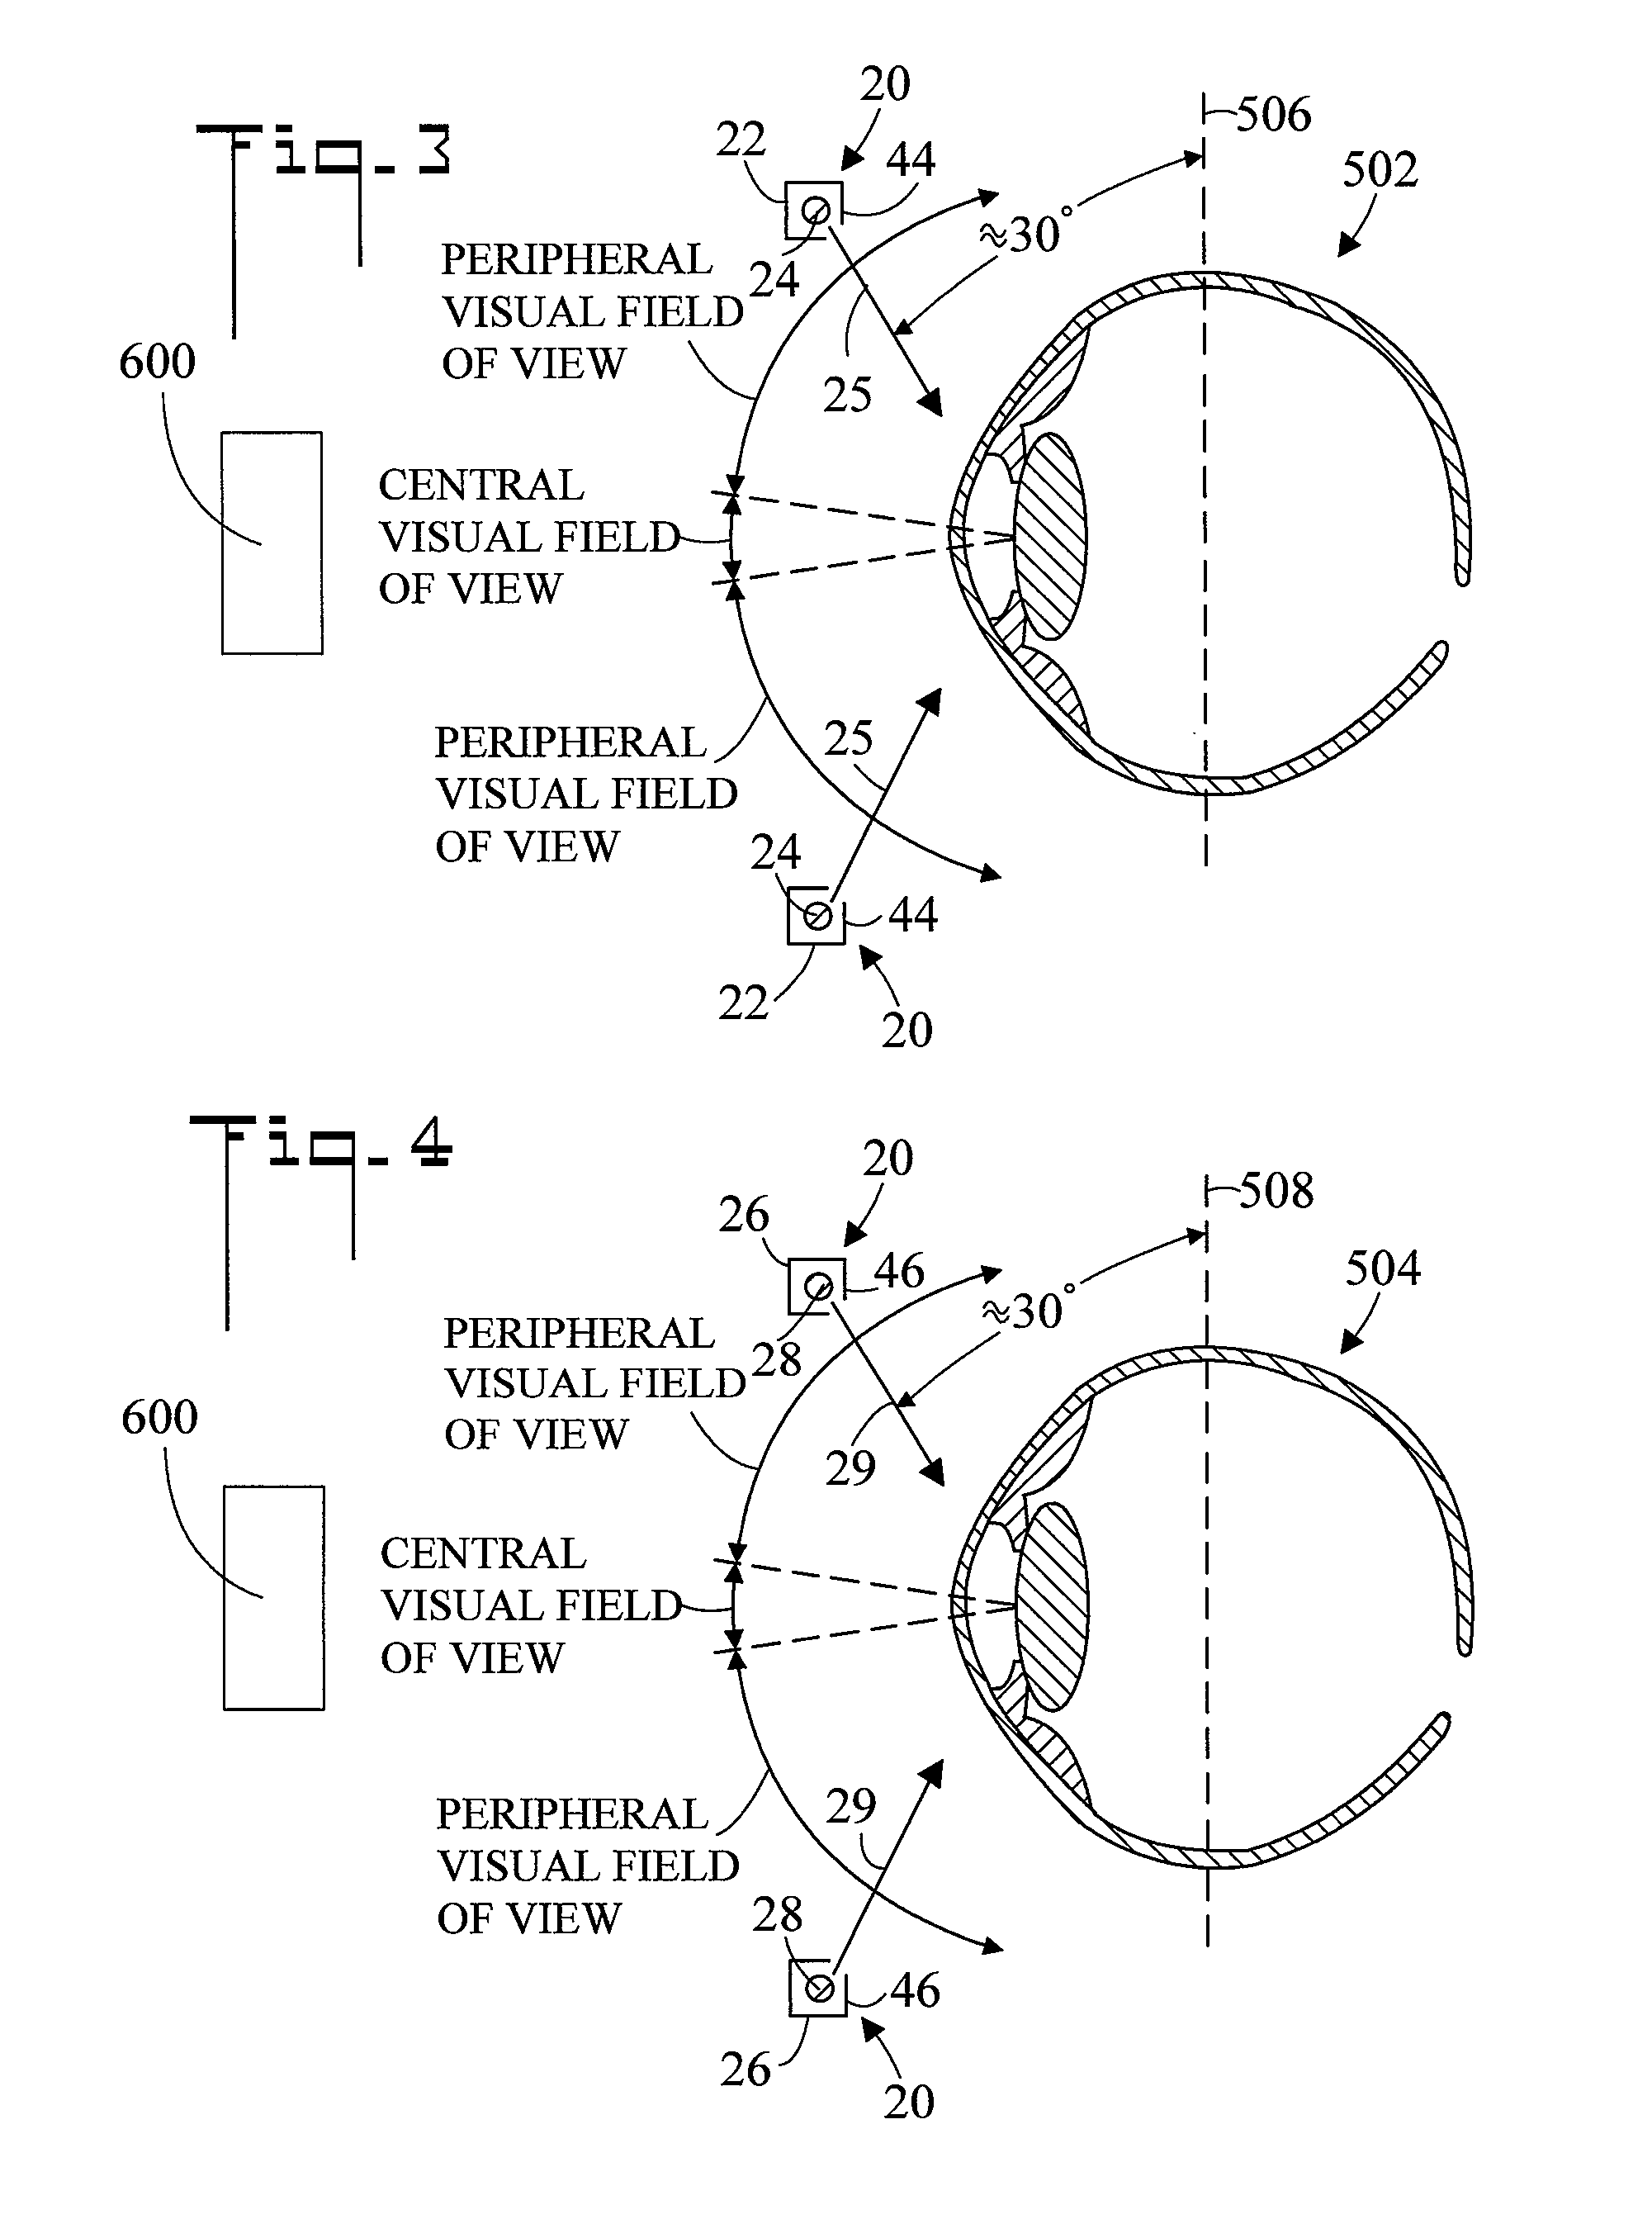 Apparatus and method for preventing photosensitive epilepsy